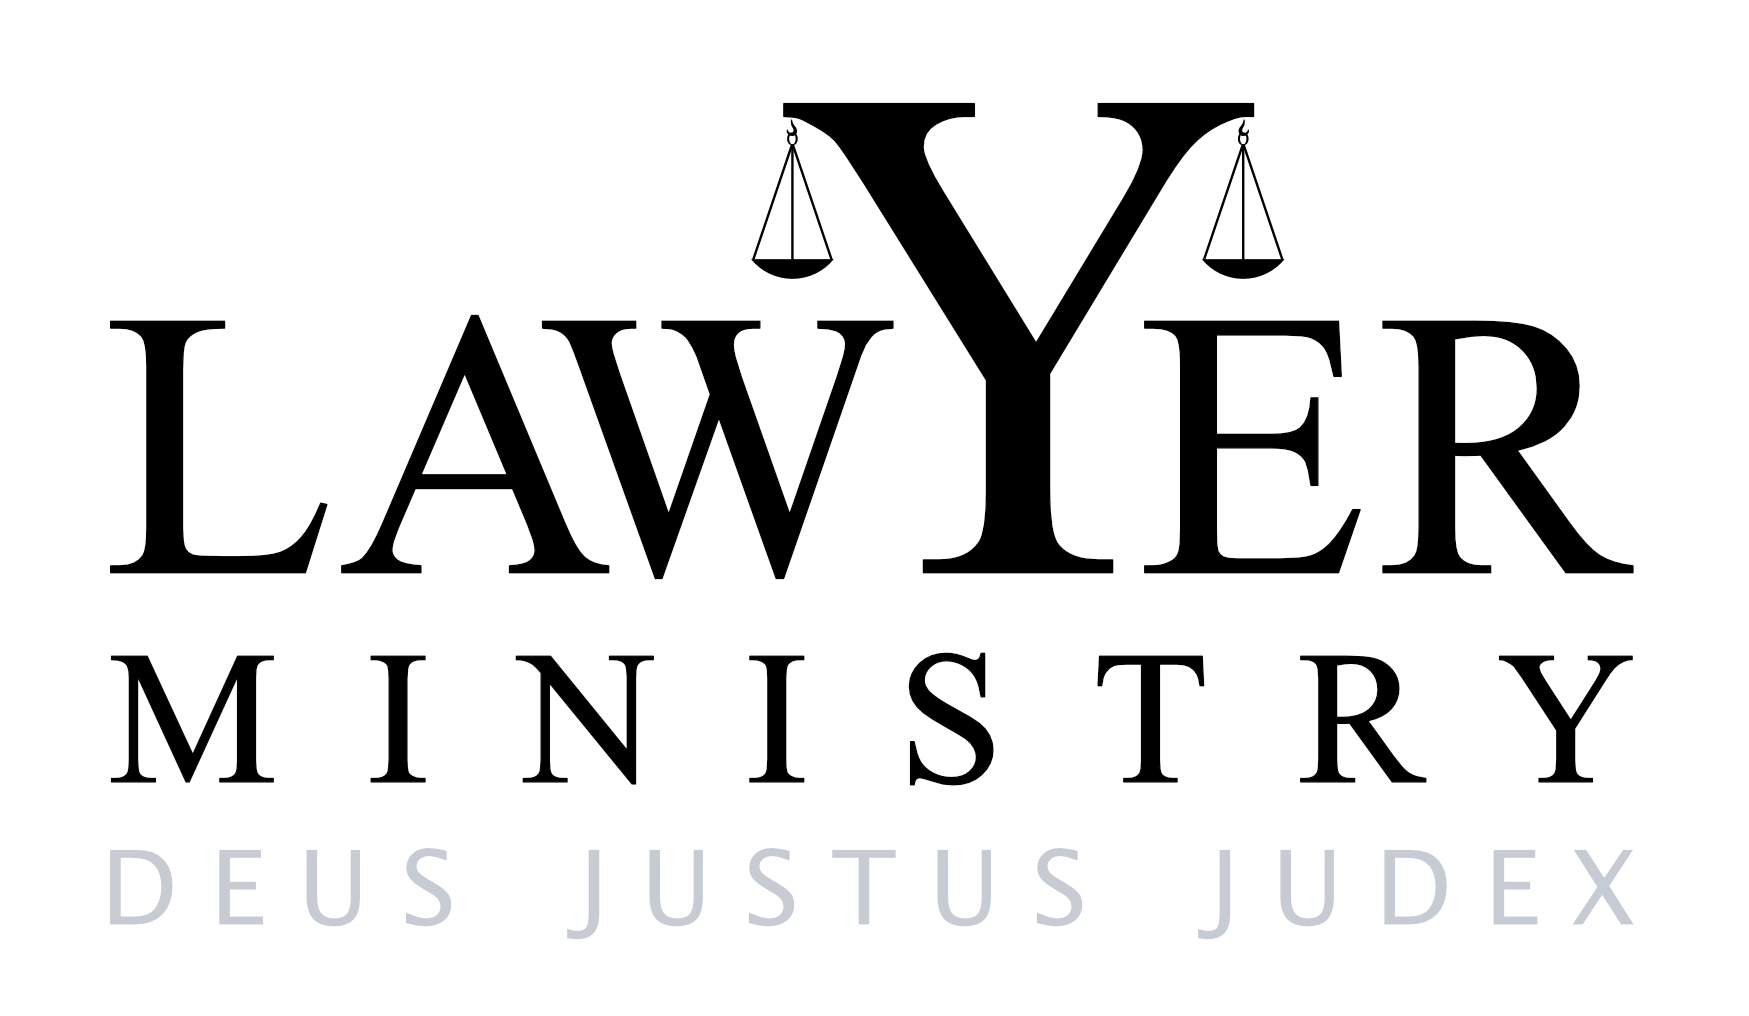 Lawyer Ministry